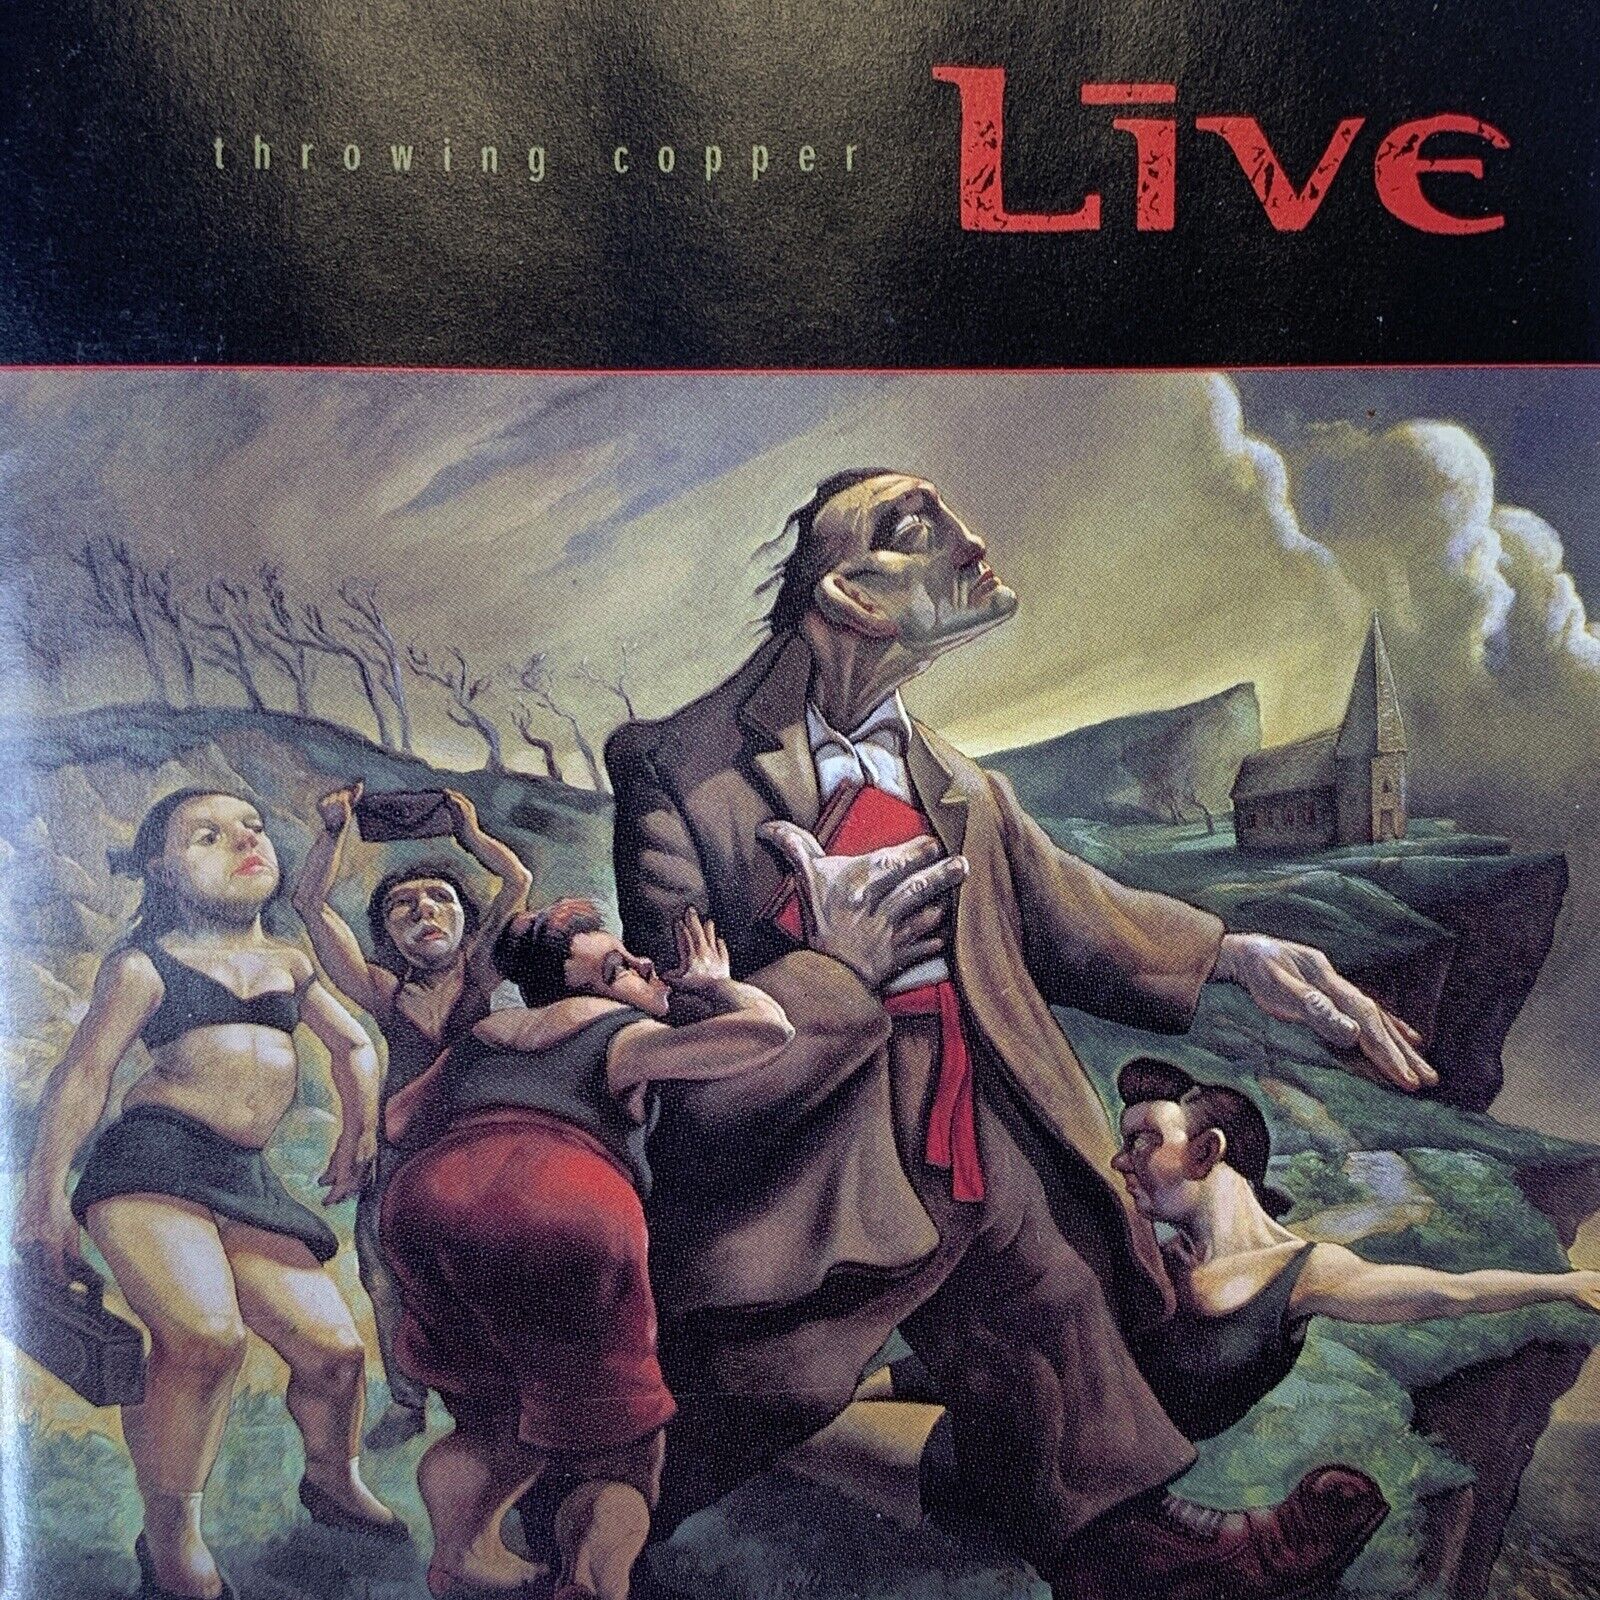 Throwing Copper by Live (CD, Vintage 1994)